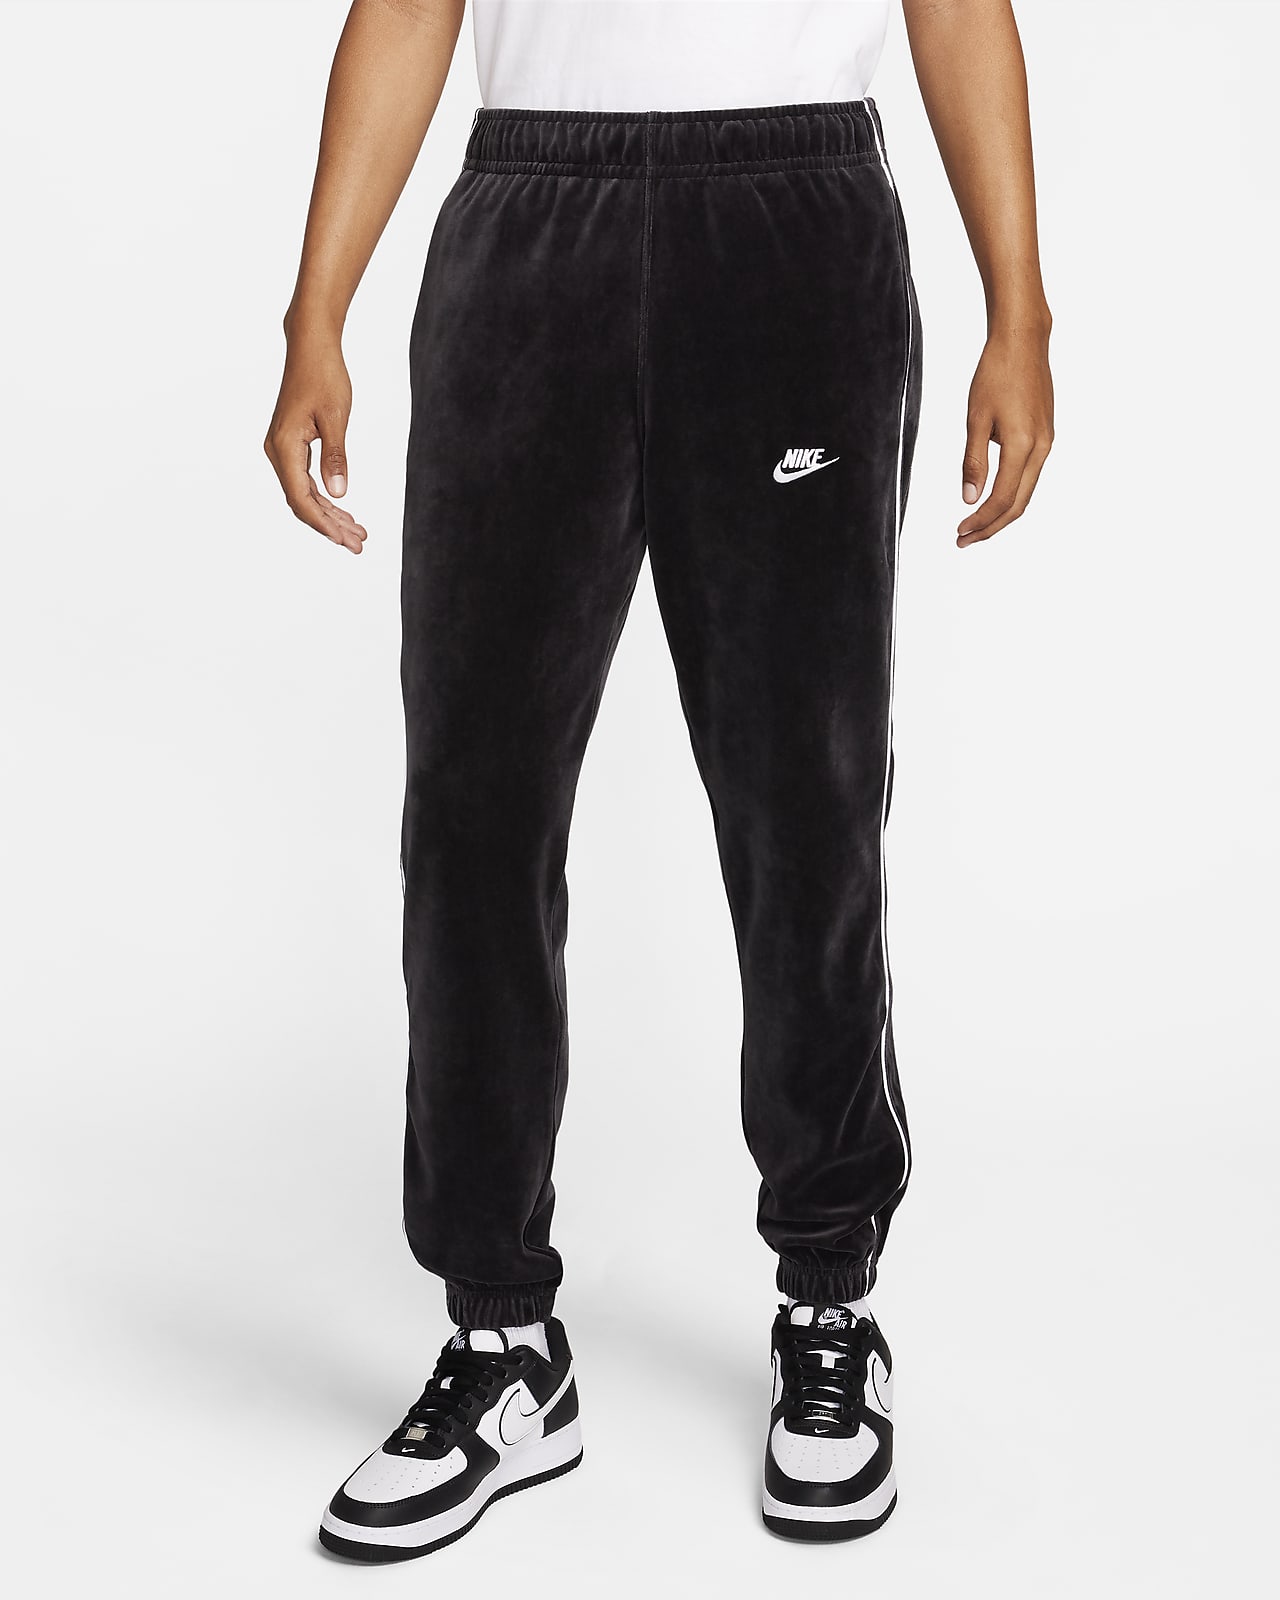 https://static.nike.com/a/images/t_PDP_1280_v1/f_auto,q_auto:eco/7d18a3c2-f674-48a5-a2e8-02a538afe34e/sportswear-club-velour-trousers-dXBZ9C.png